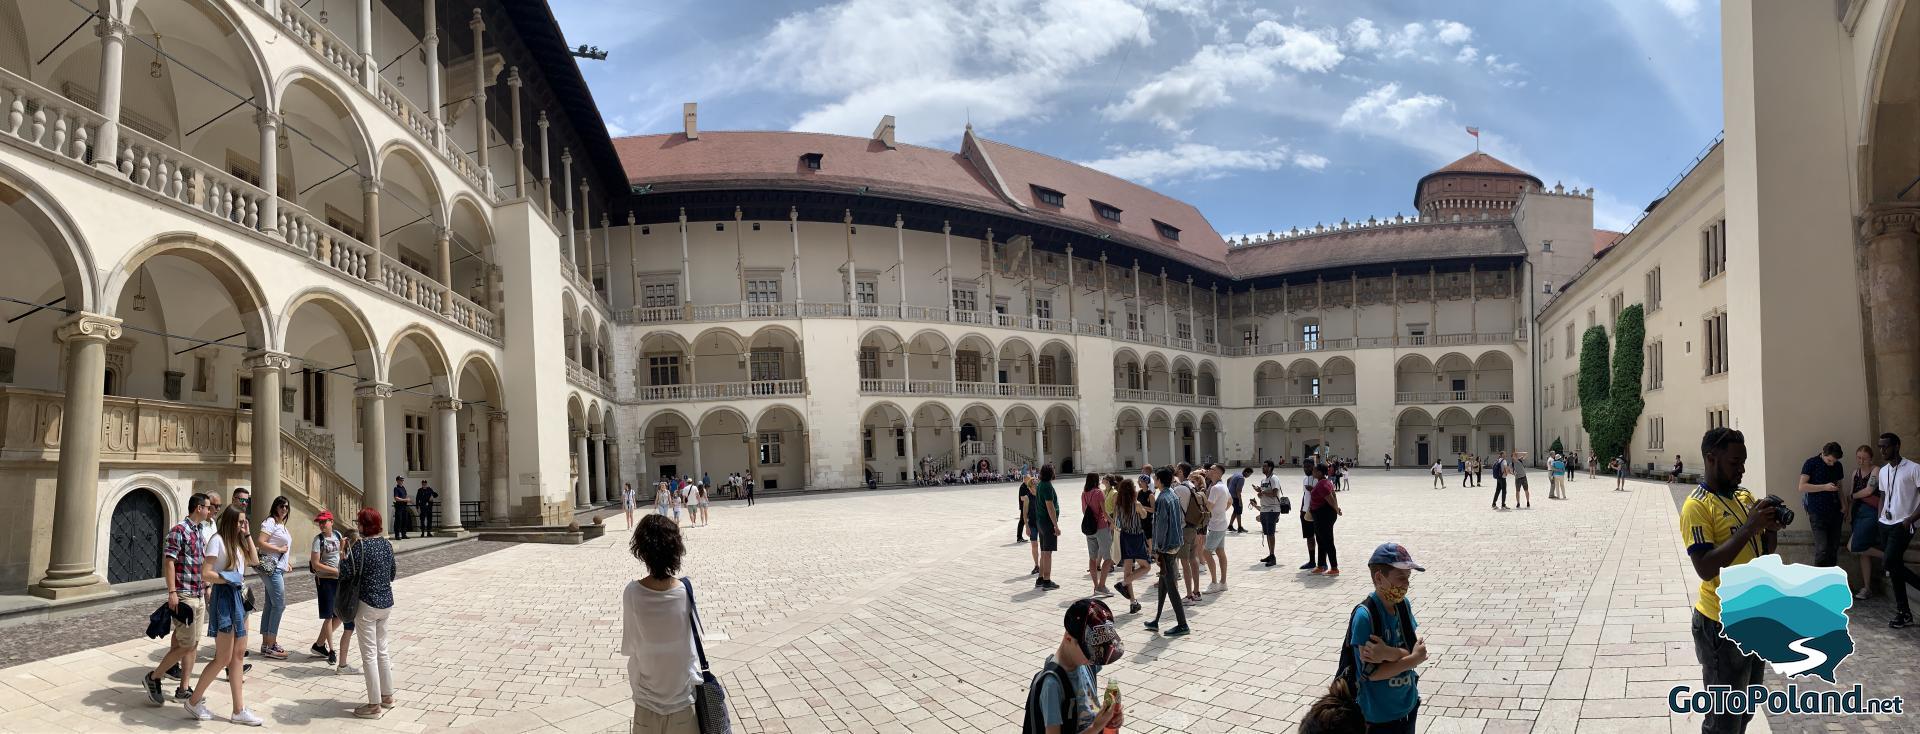 there are a lot of tourists in the courtyard of the castle